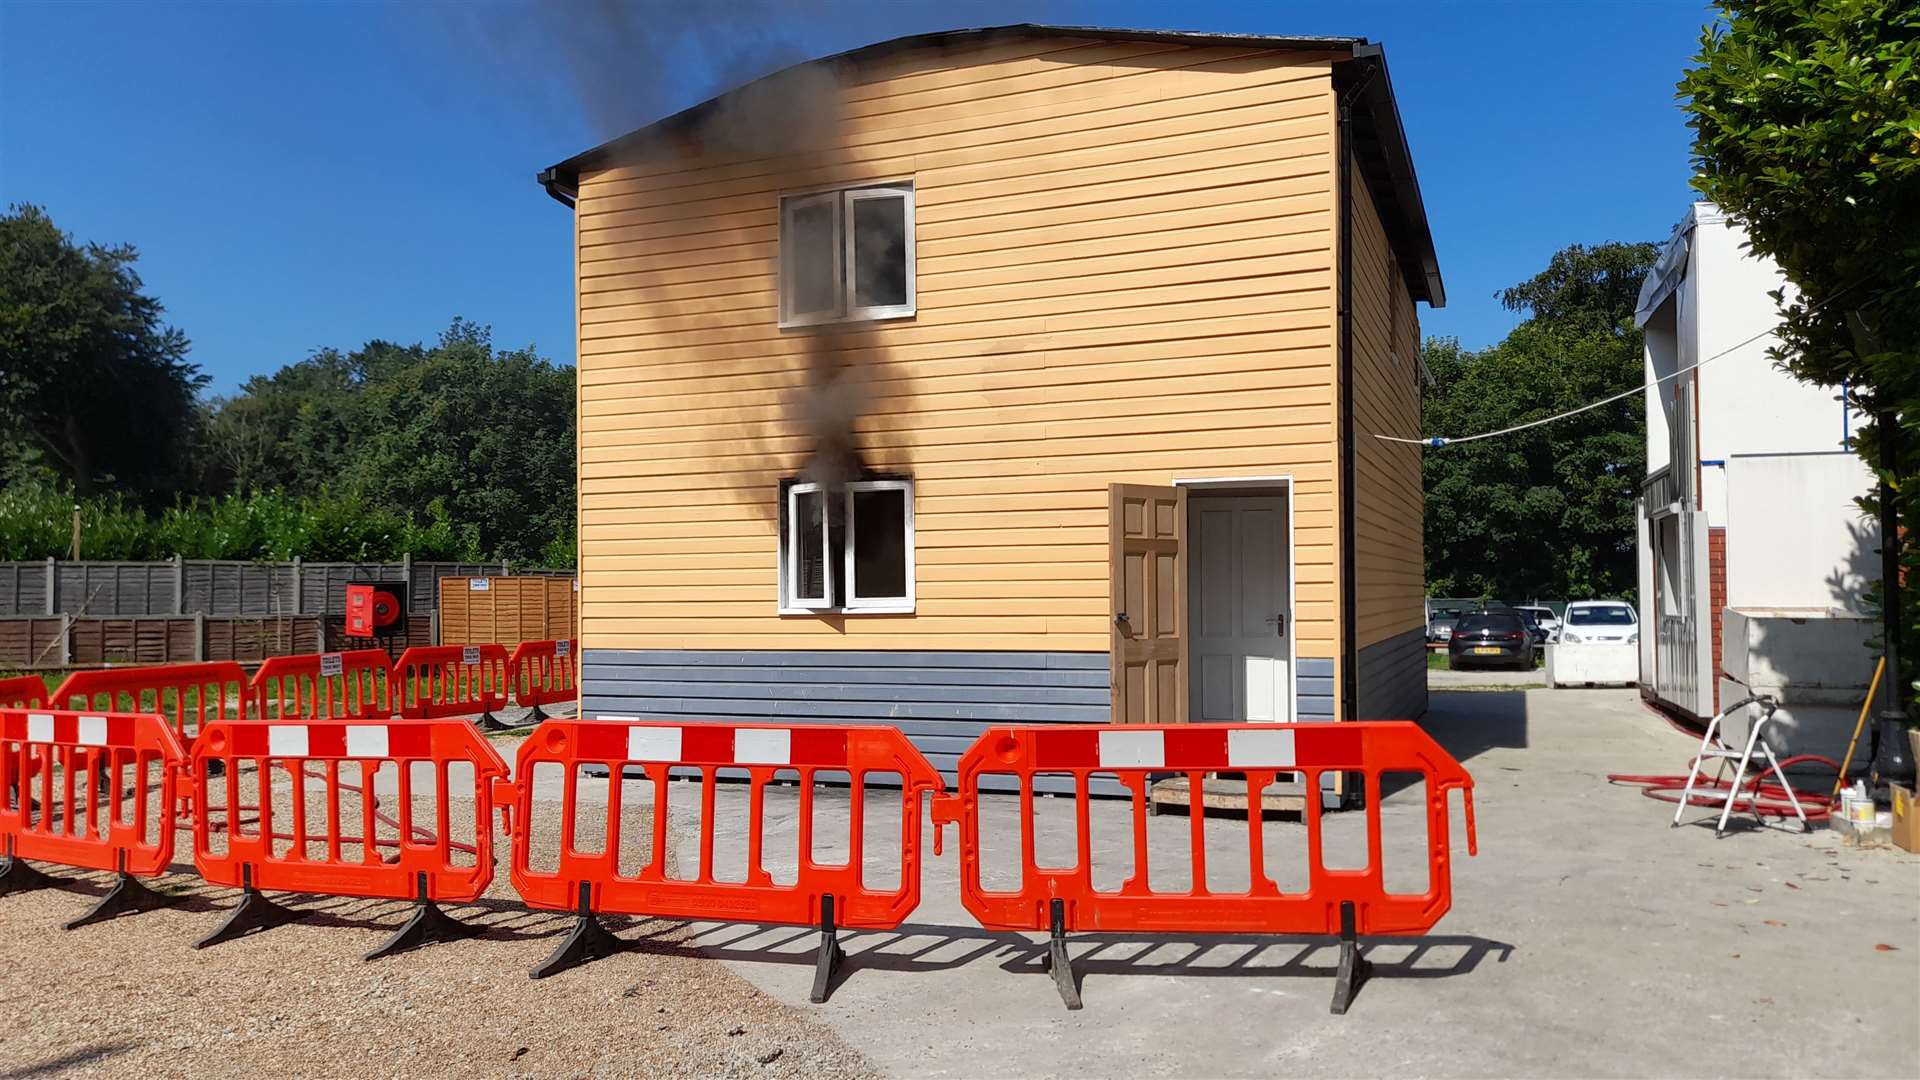 The house was speedily constructed in a rural car park before being torched